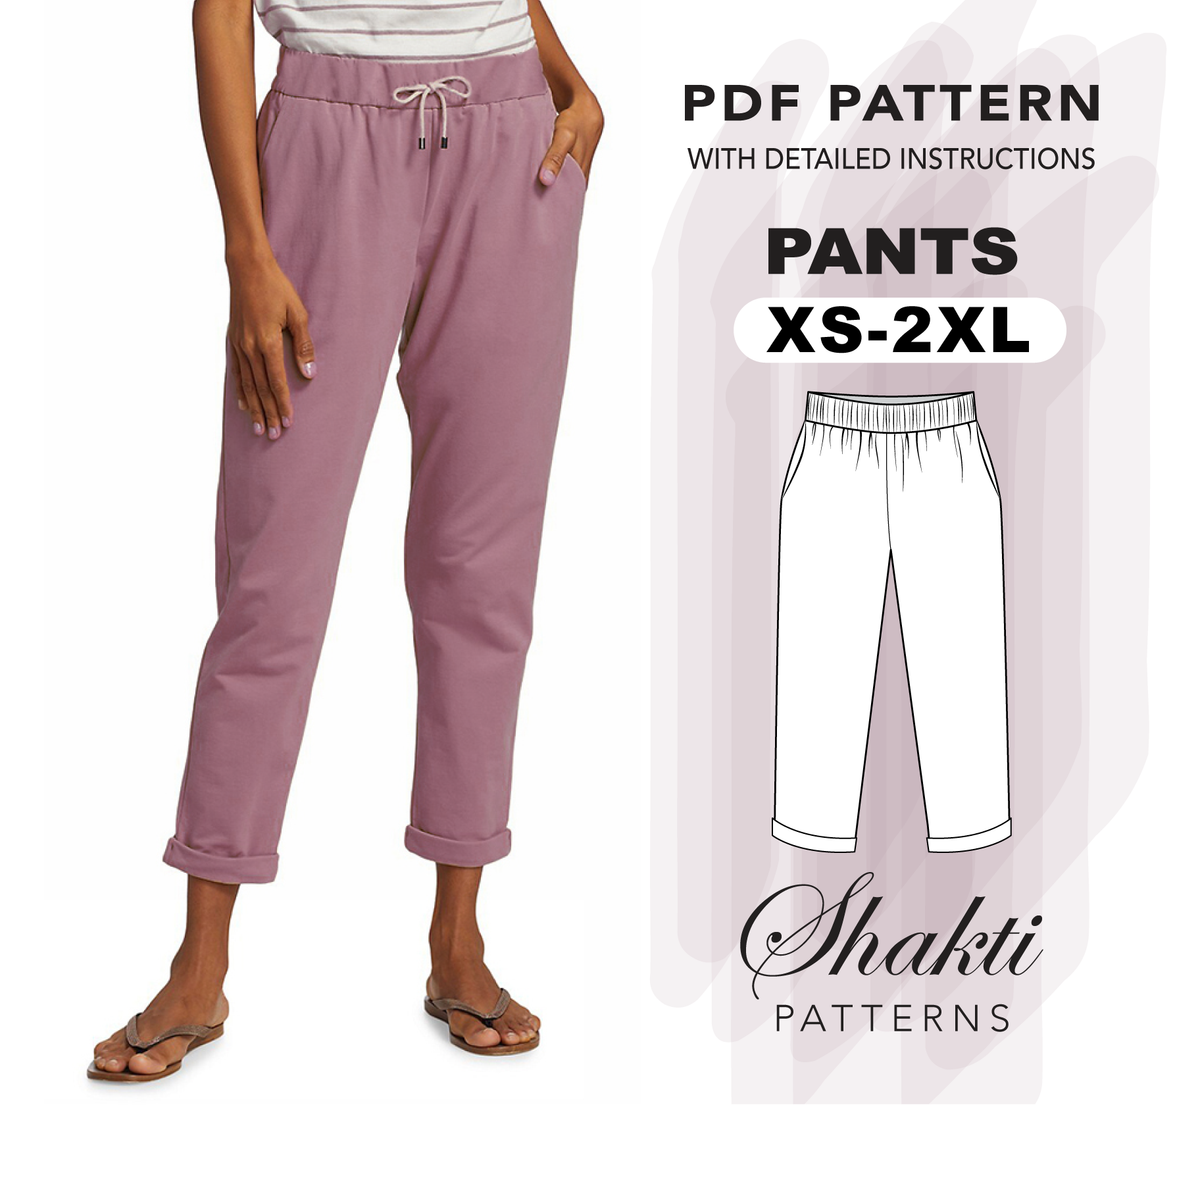 Sweatpants pattern sewing instructions for ladies, XS-XXXL